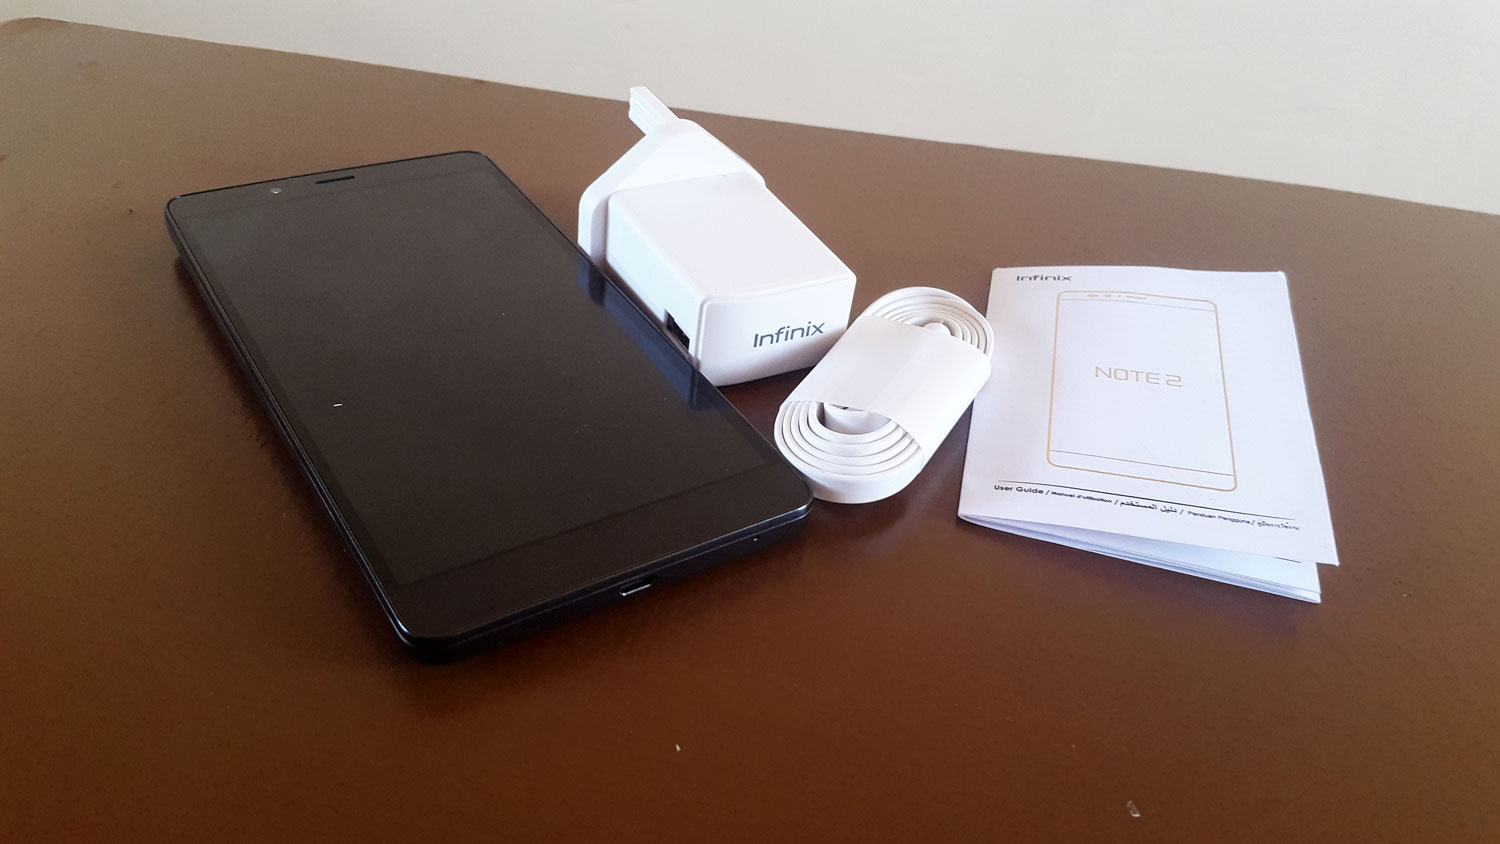 [image] Infinix Note 2 unboxing._